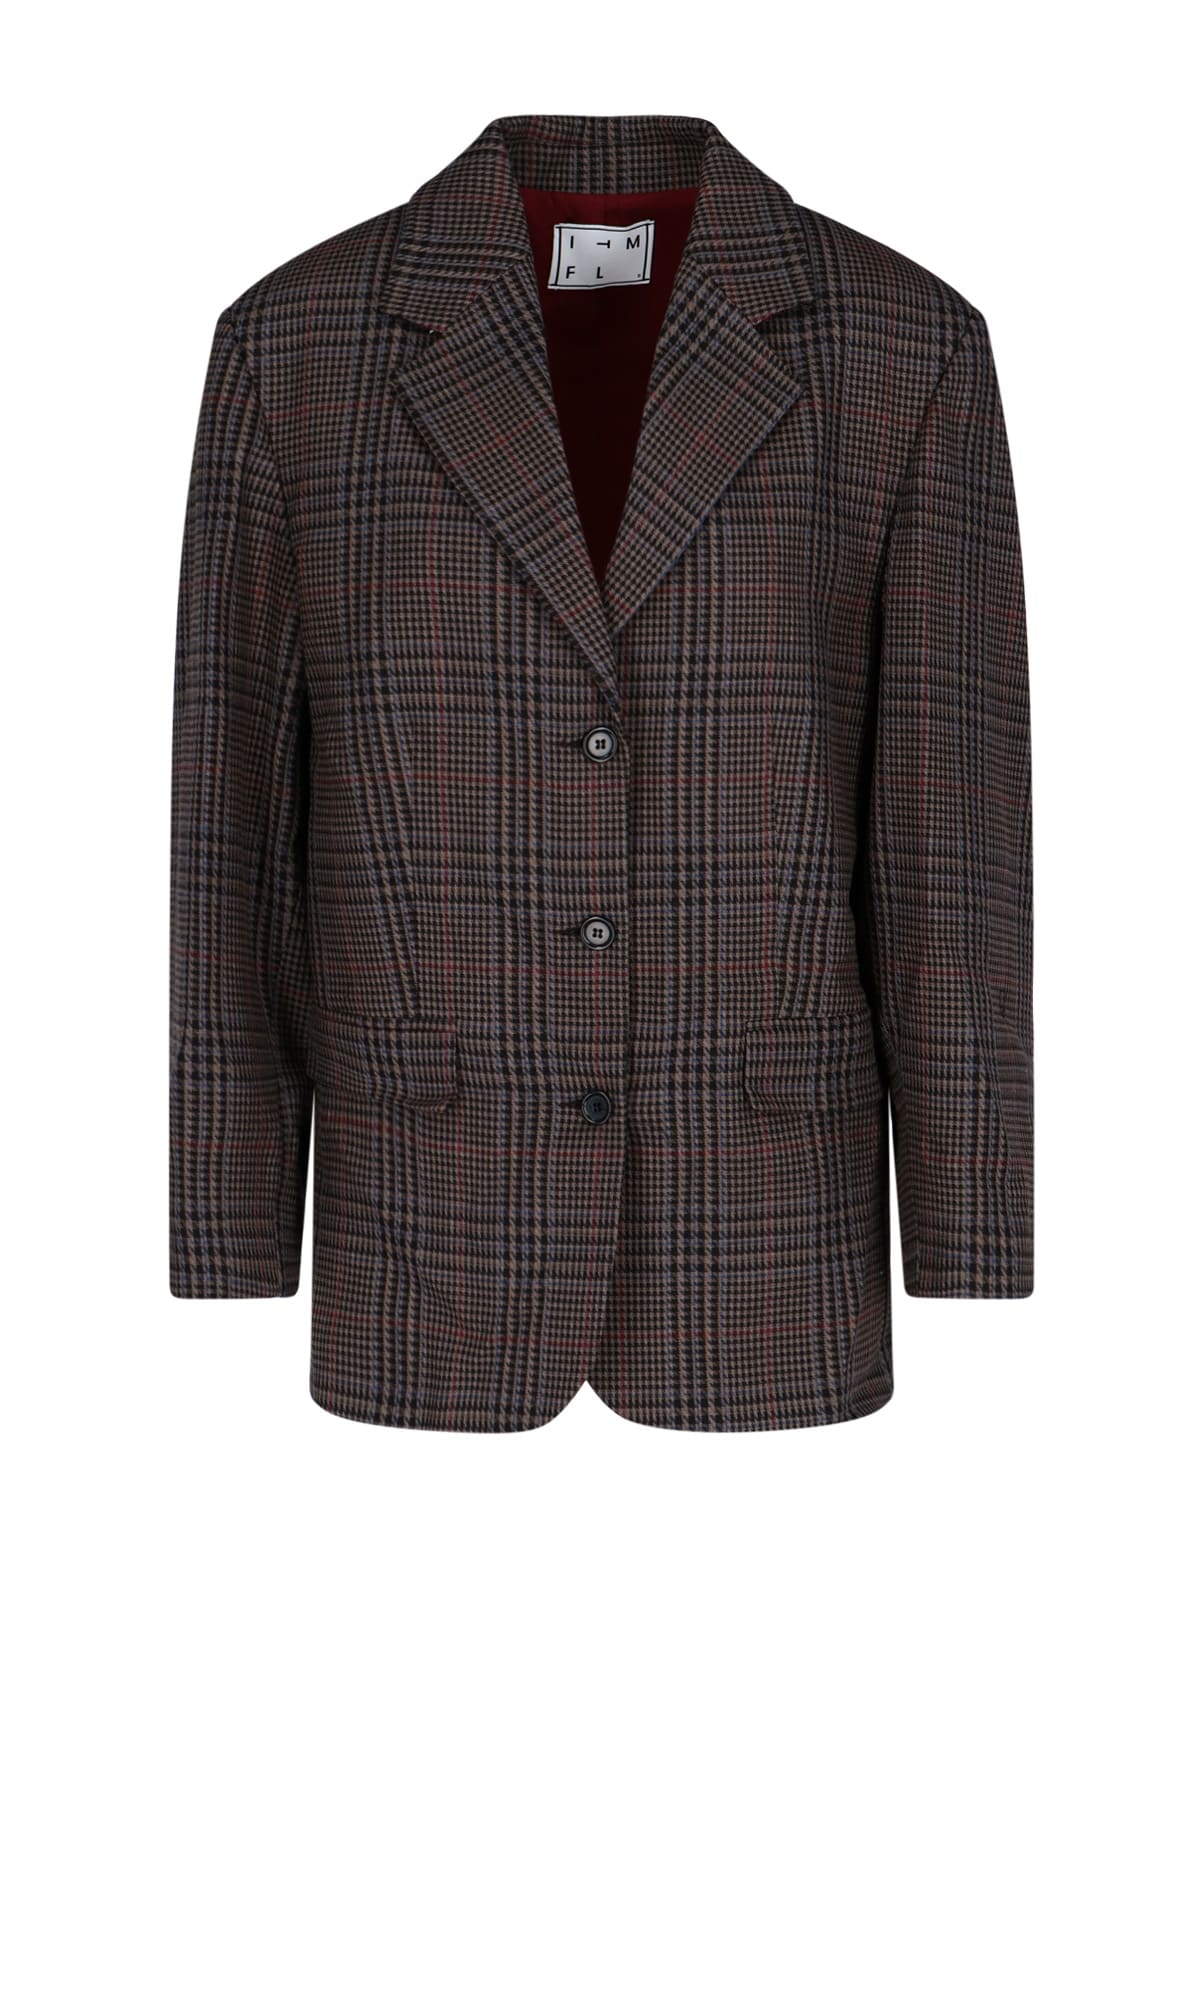 In The Mood For Love Blazer